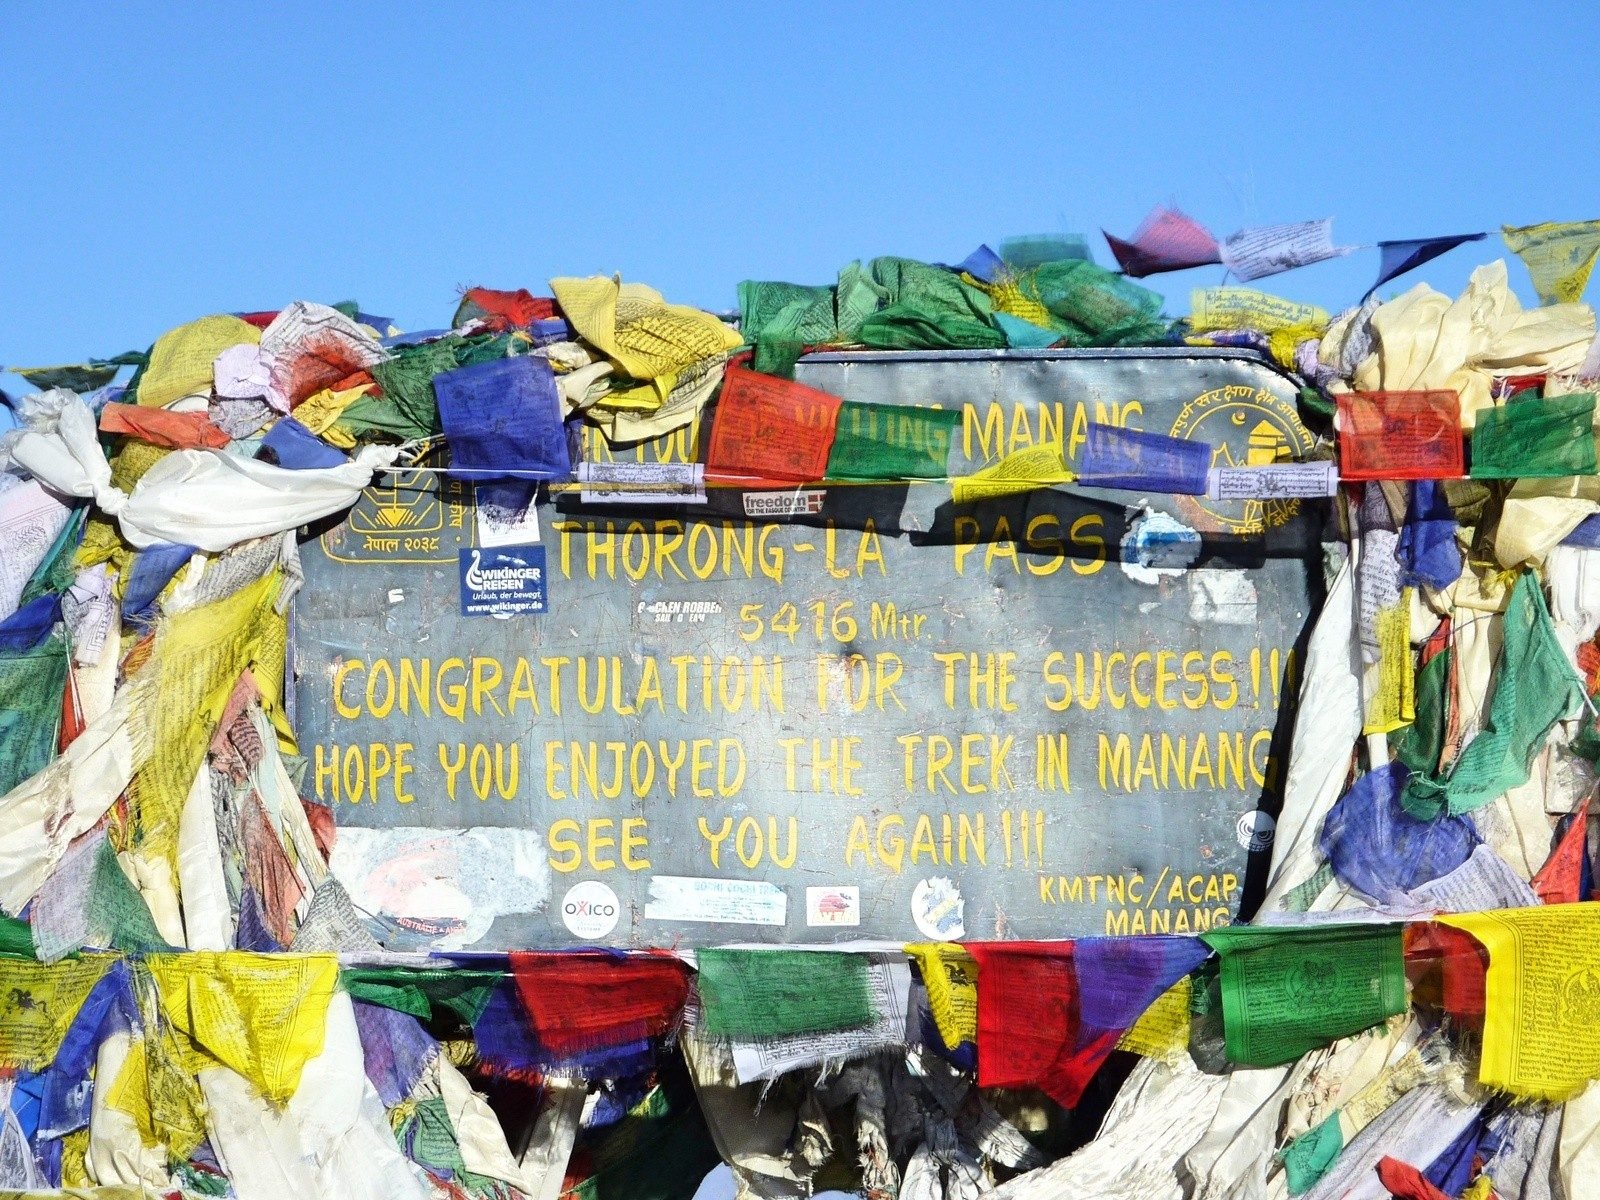 The sign at the top of Thorong La Pass, in Nepal